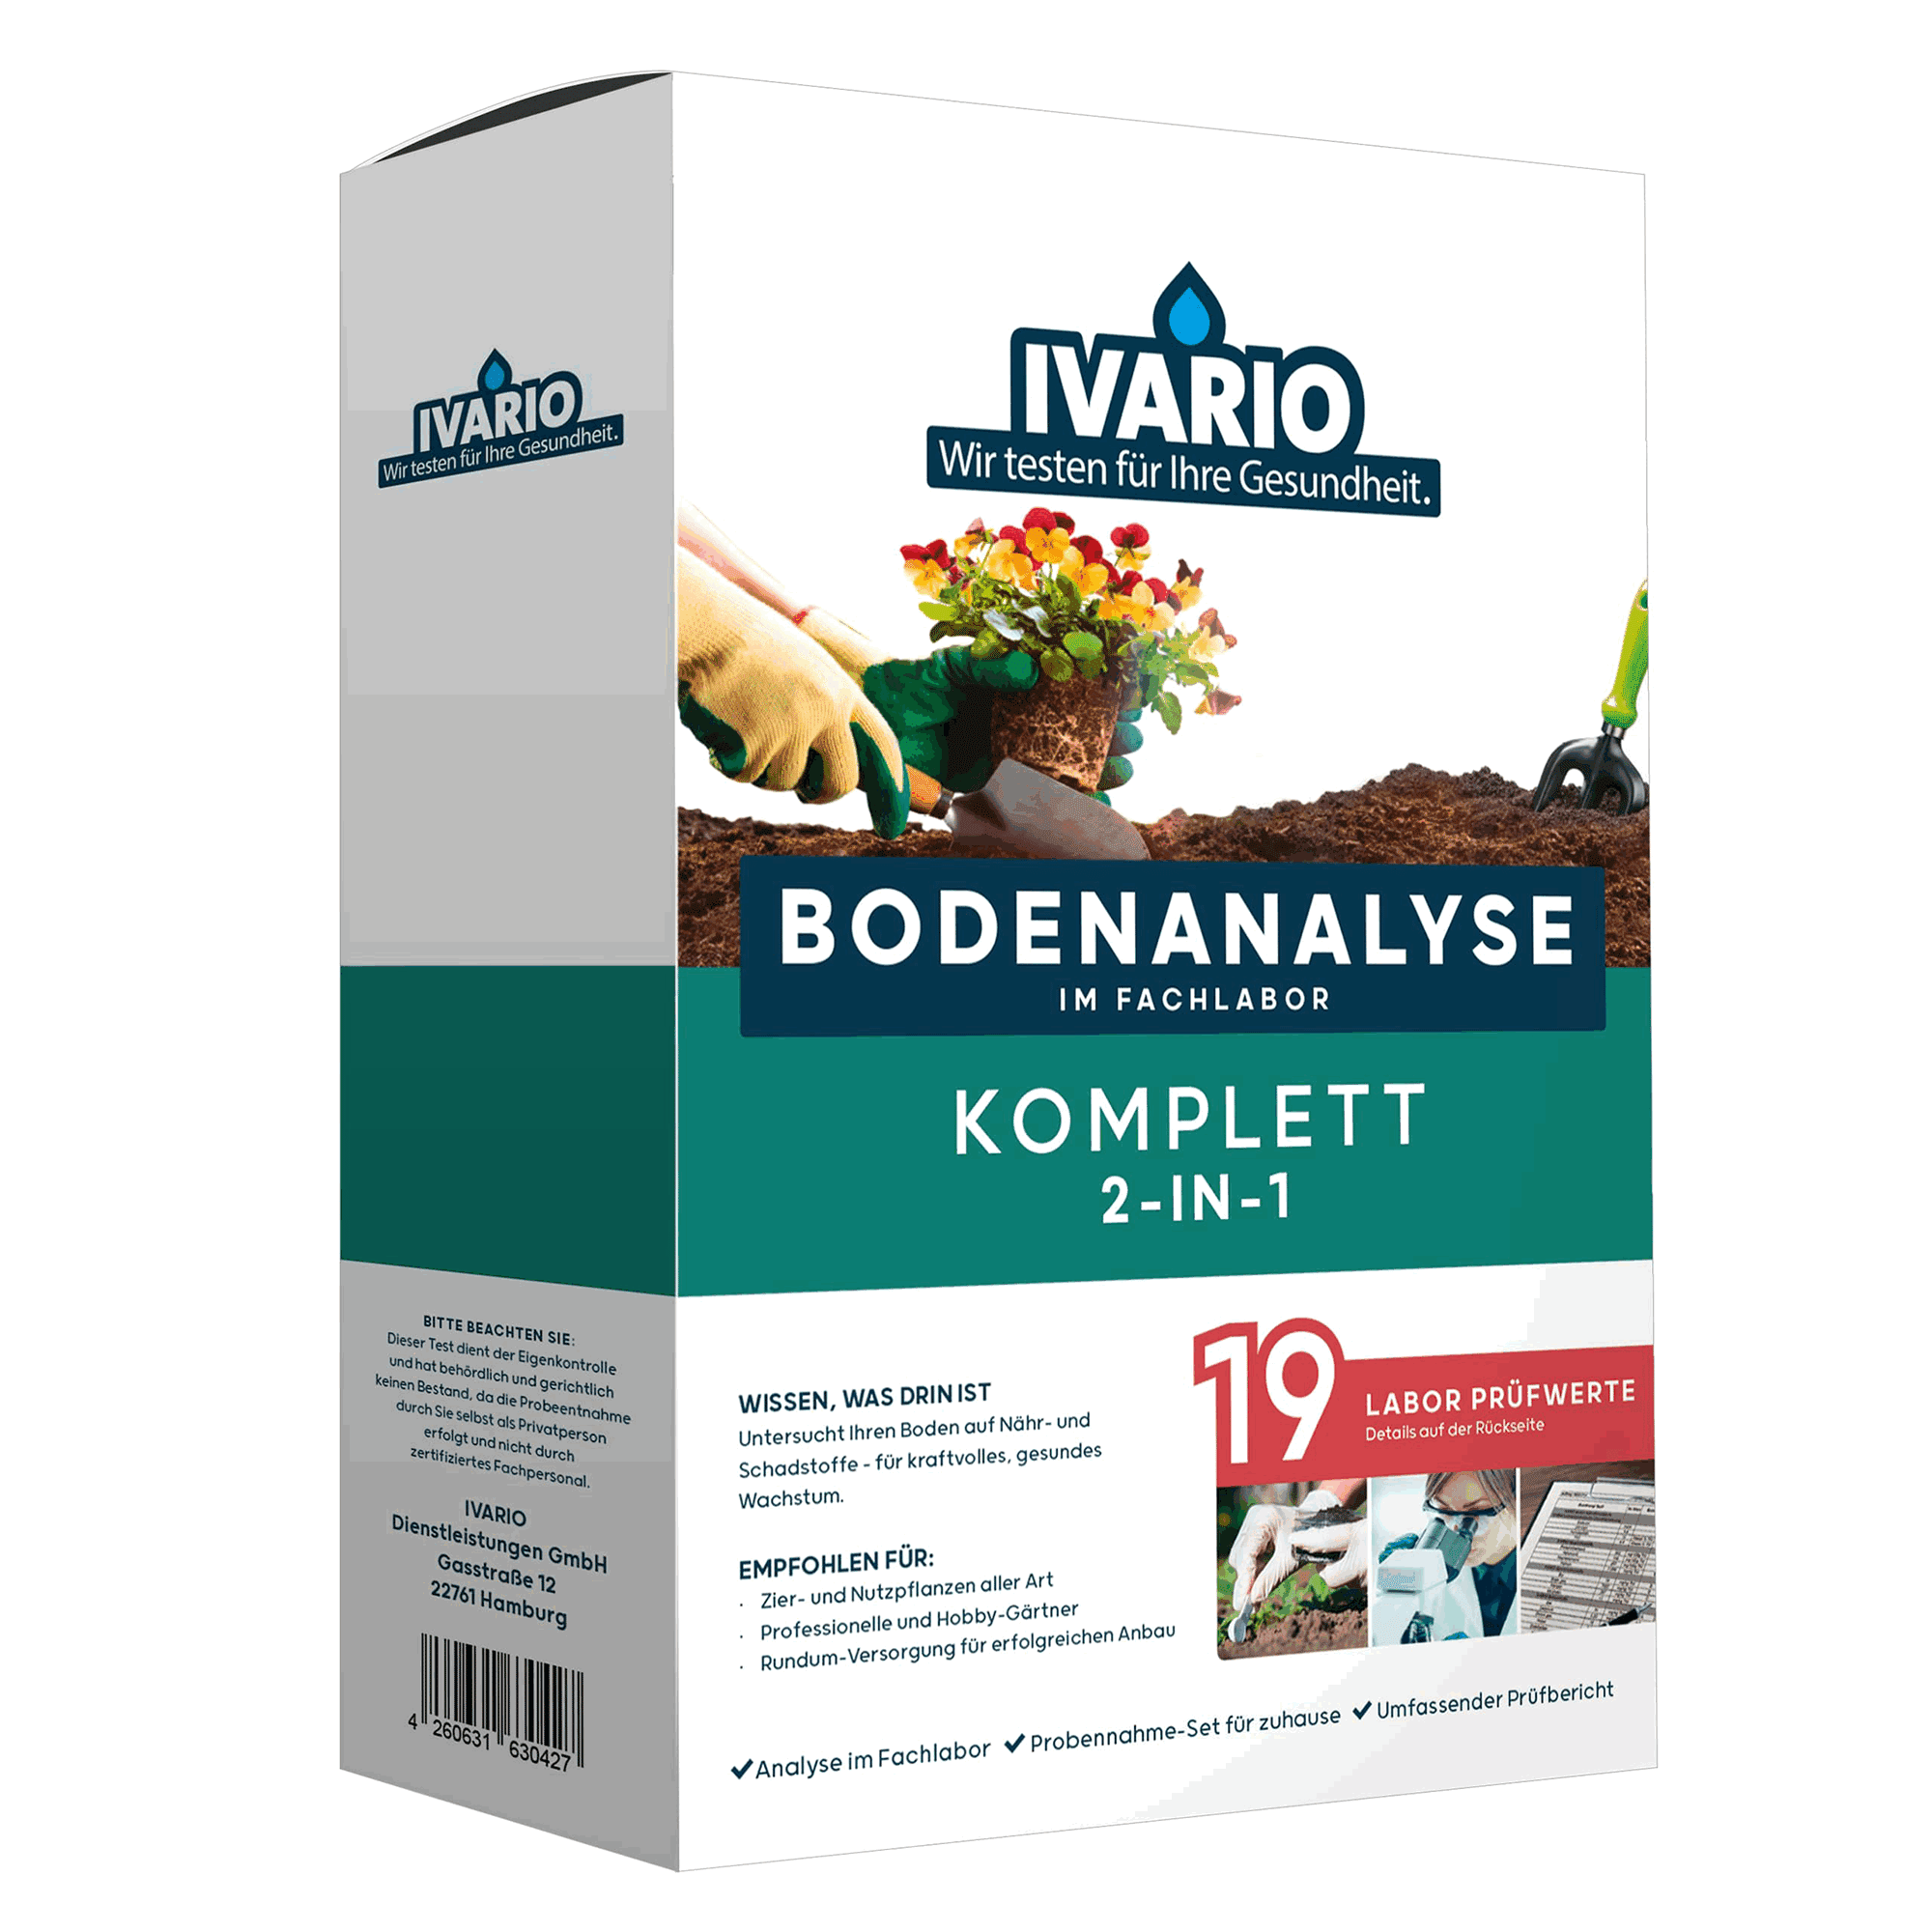 Bodentest '2-in-1 Komplett' 19 Prüfwerte + product picture